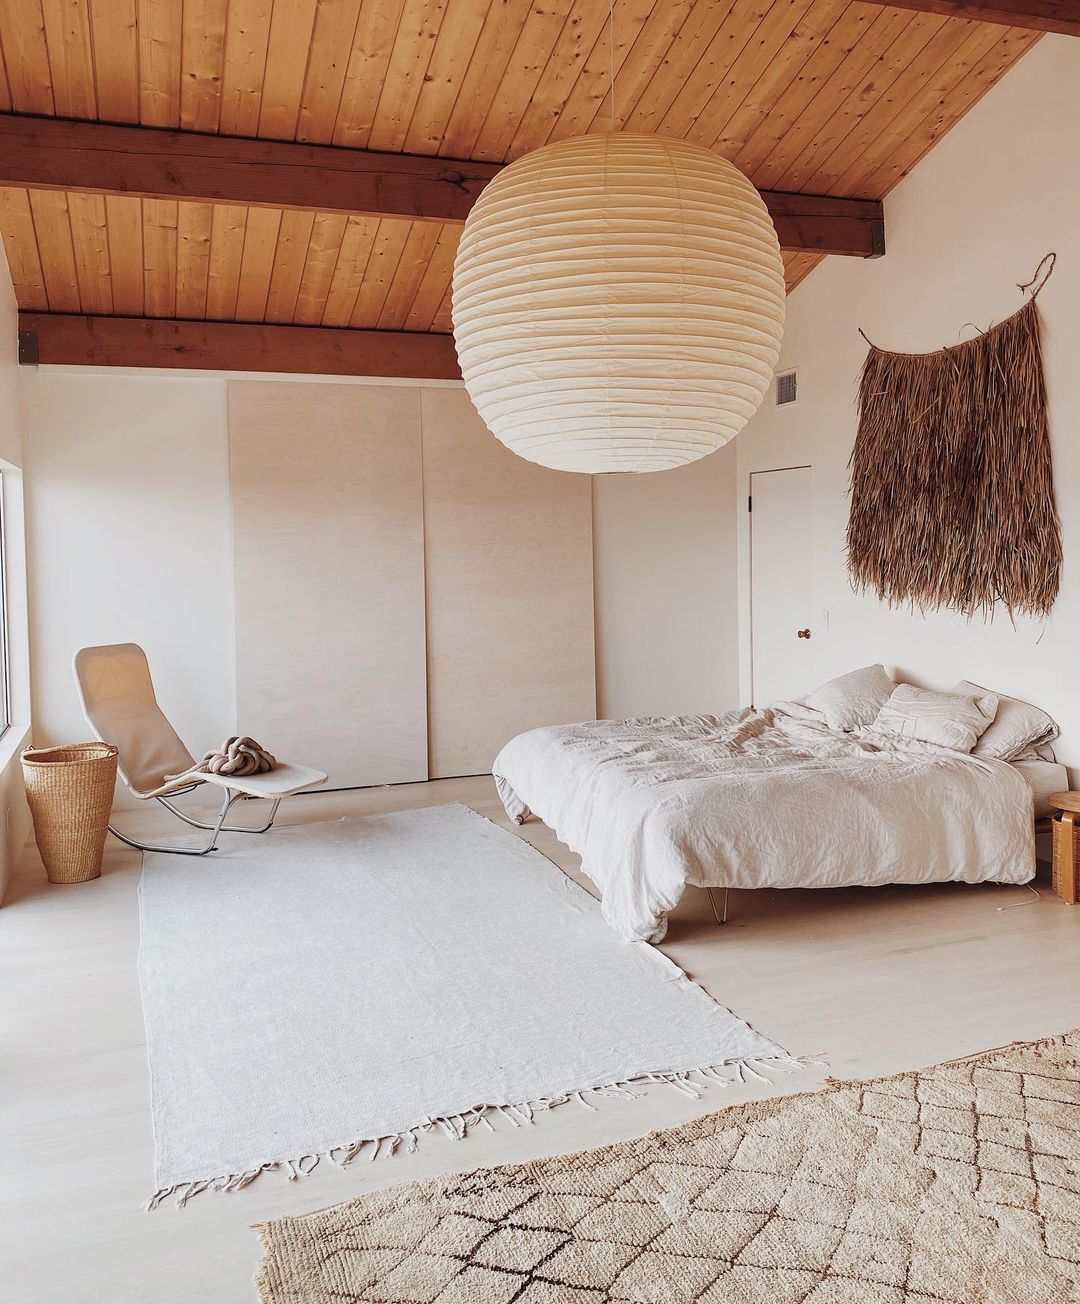 Airy, minimally designed bedroom with large paper lantern style light fixture. Photo by Instagram user @maraserene